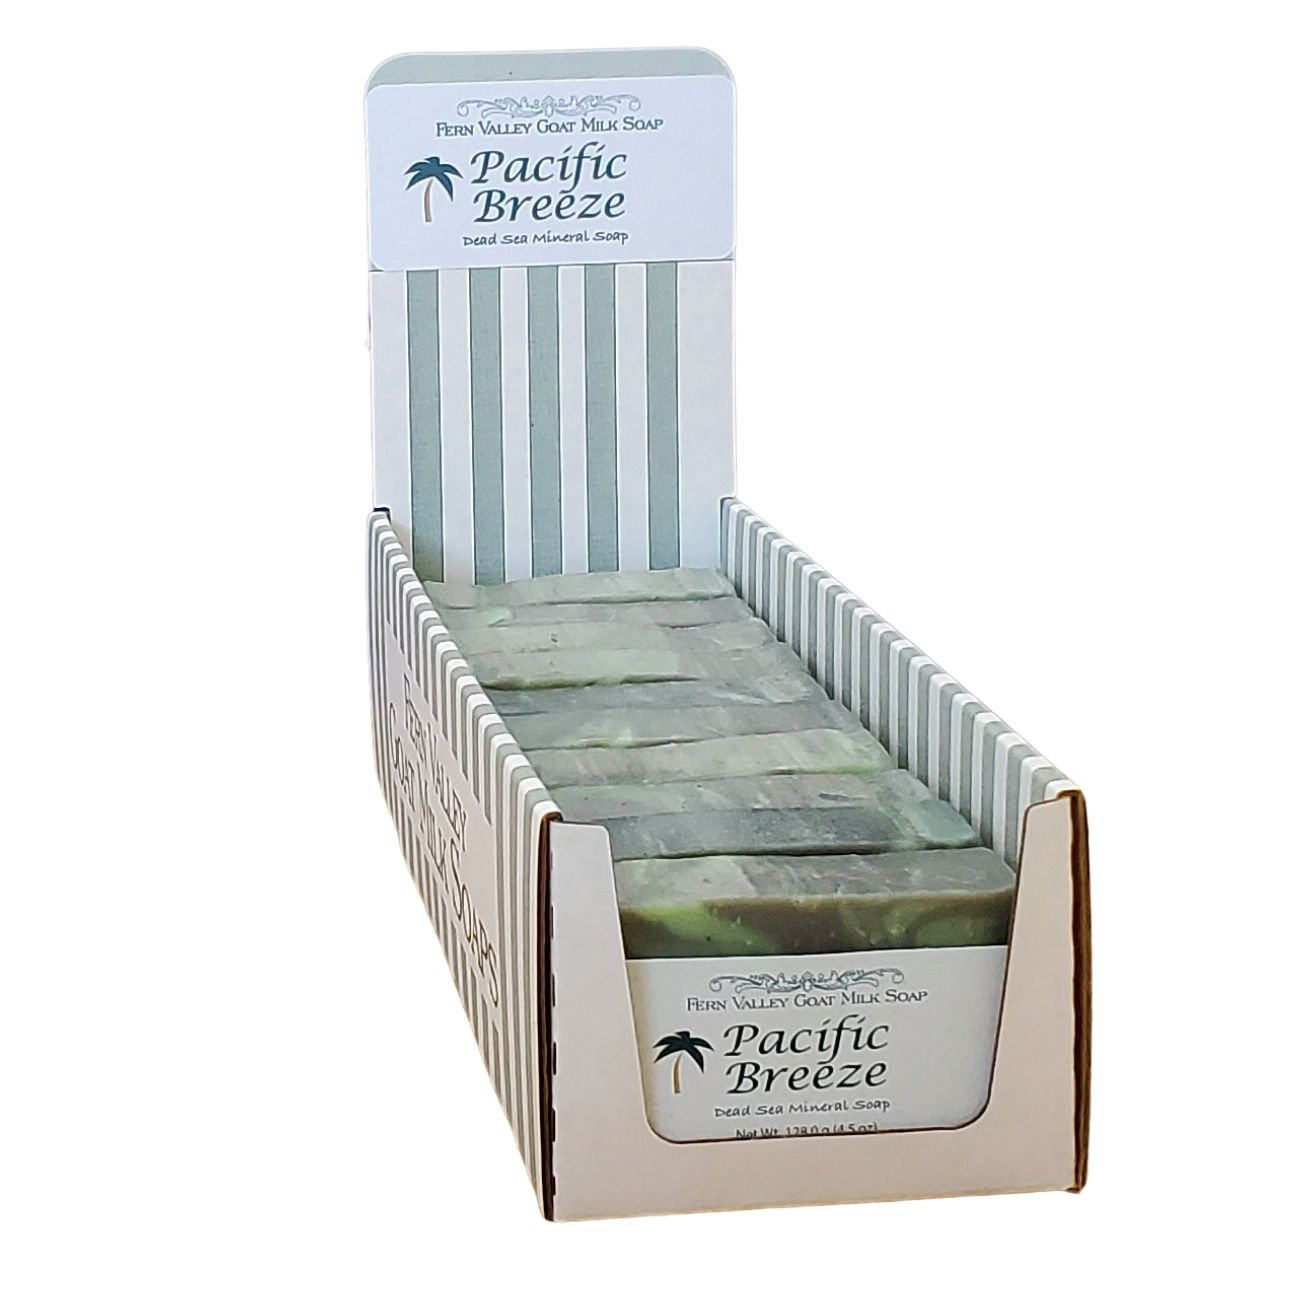 10 Bars Display Boxes, Choose the Soap You Like MSR $6.50 each bar of soap